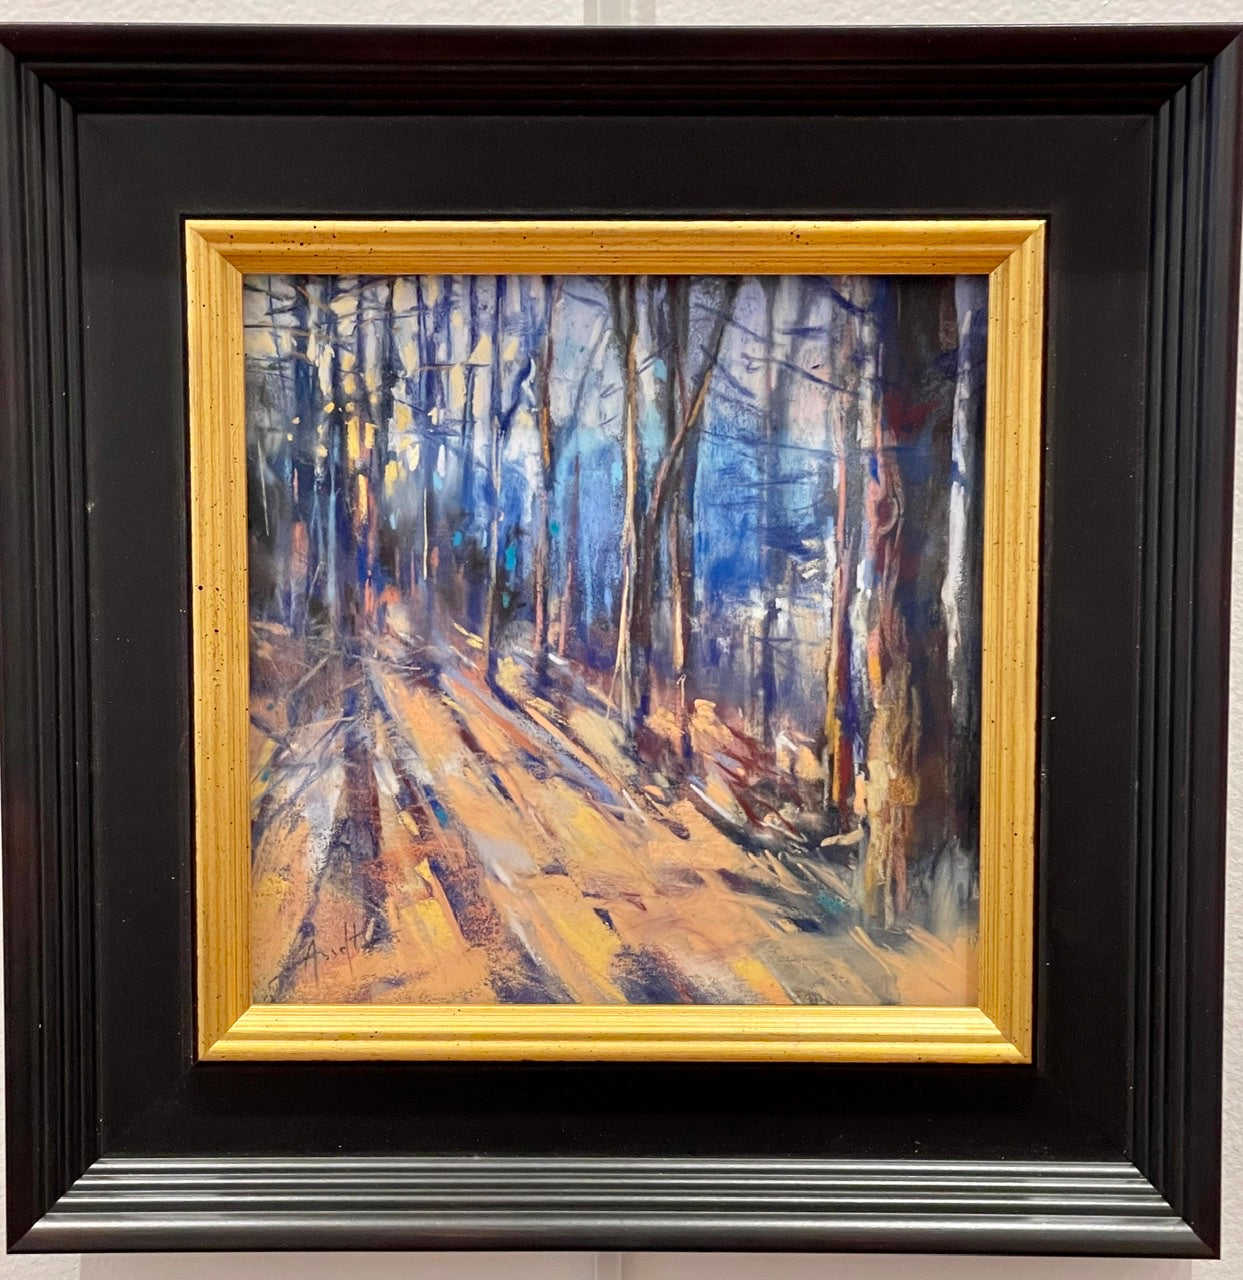 “A LIGHT THROUGH THE WOODS” - Framed Original Pastel Painting